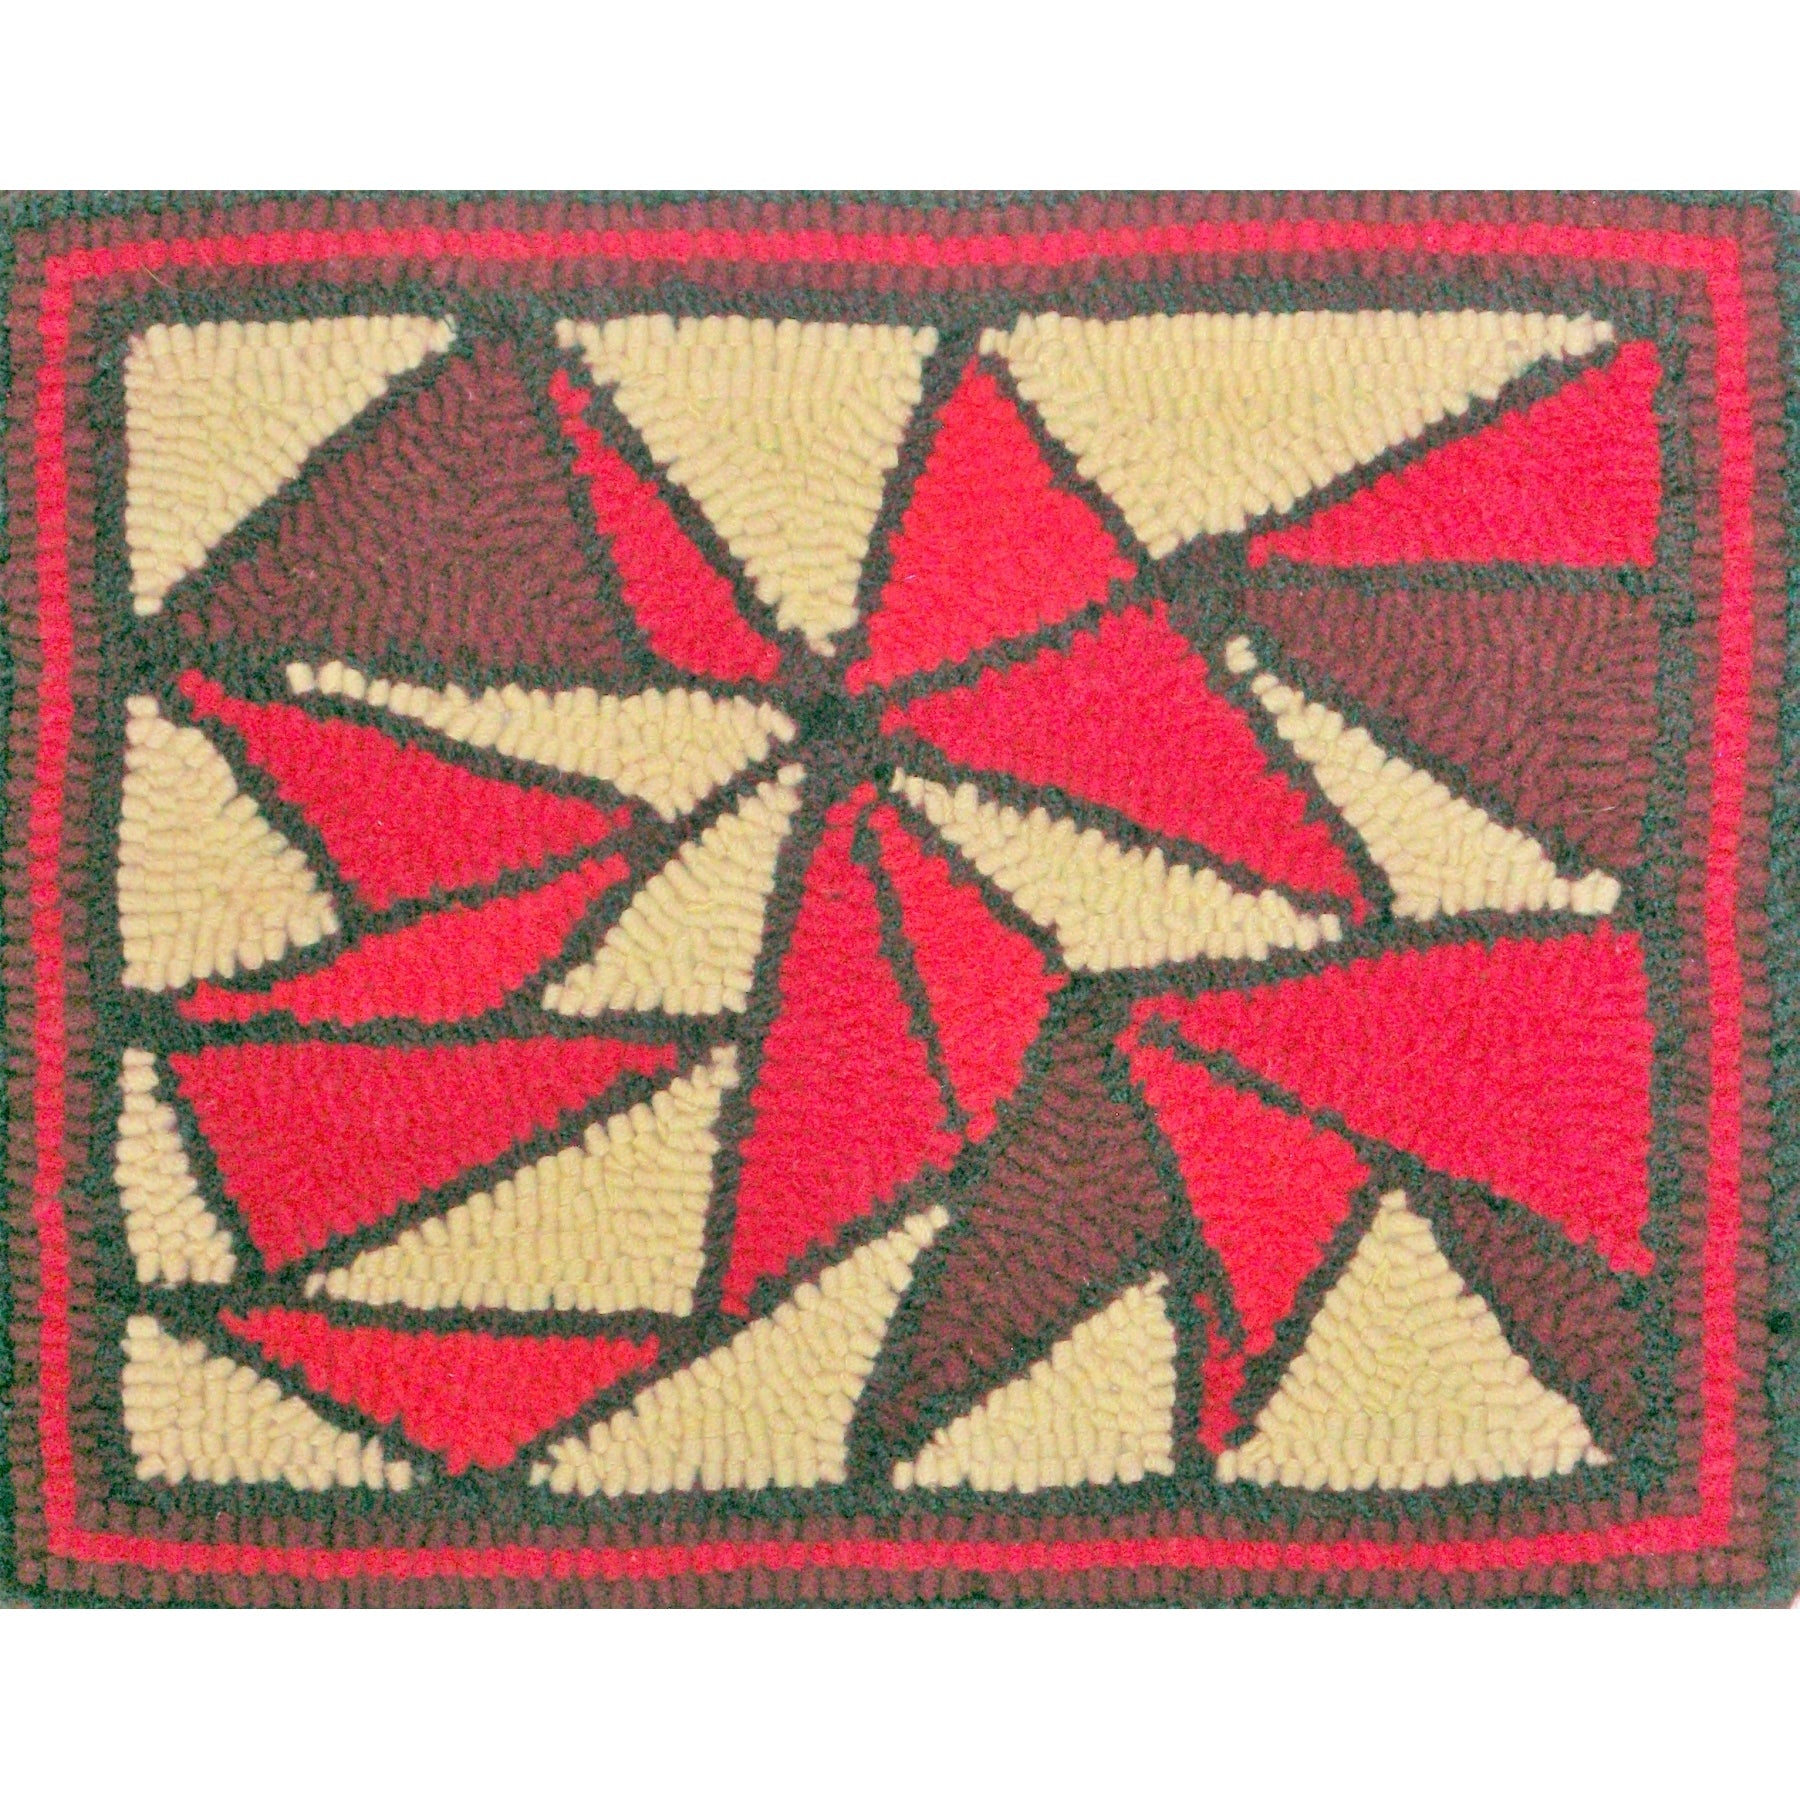 Twirling Triangles, rug hooked by Karen Maddox